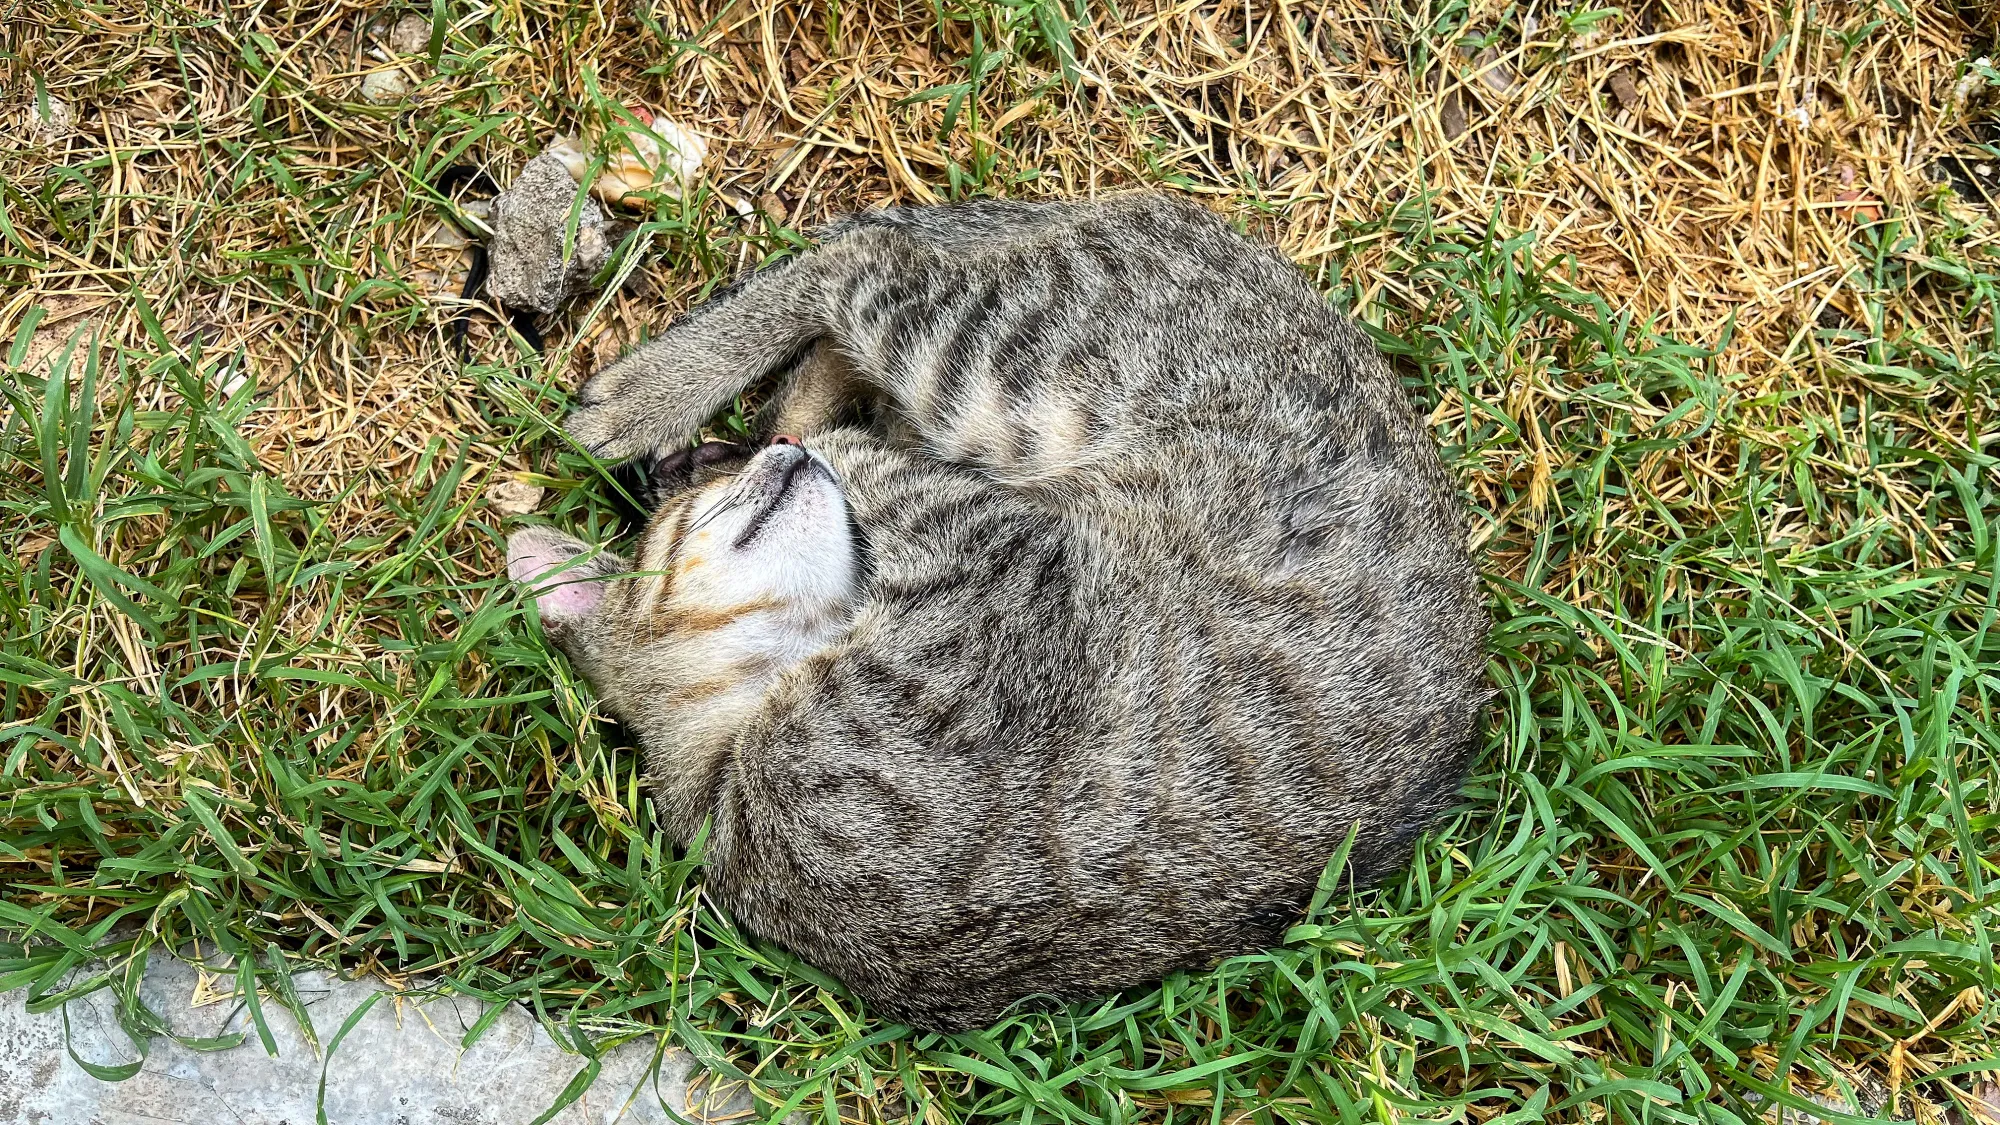 Grey spotted cat curled into a ball sleeping in the grass